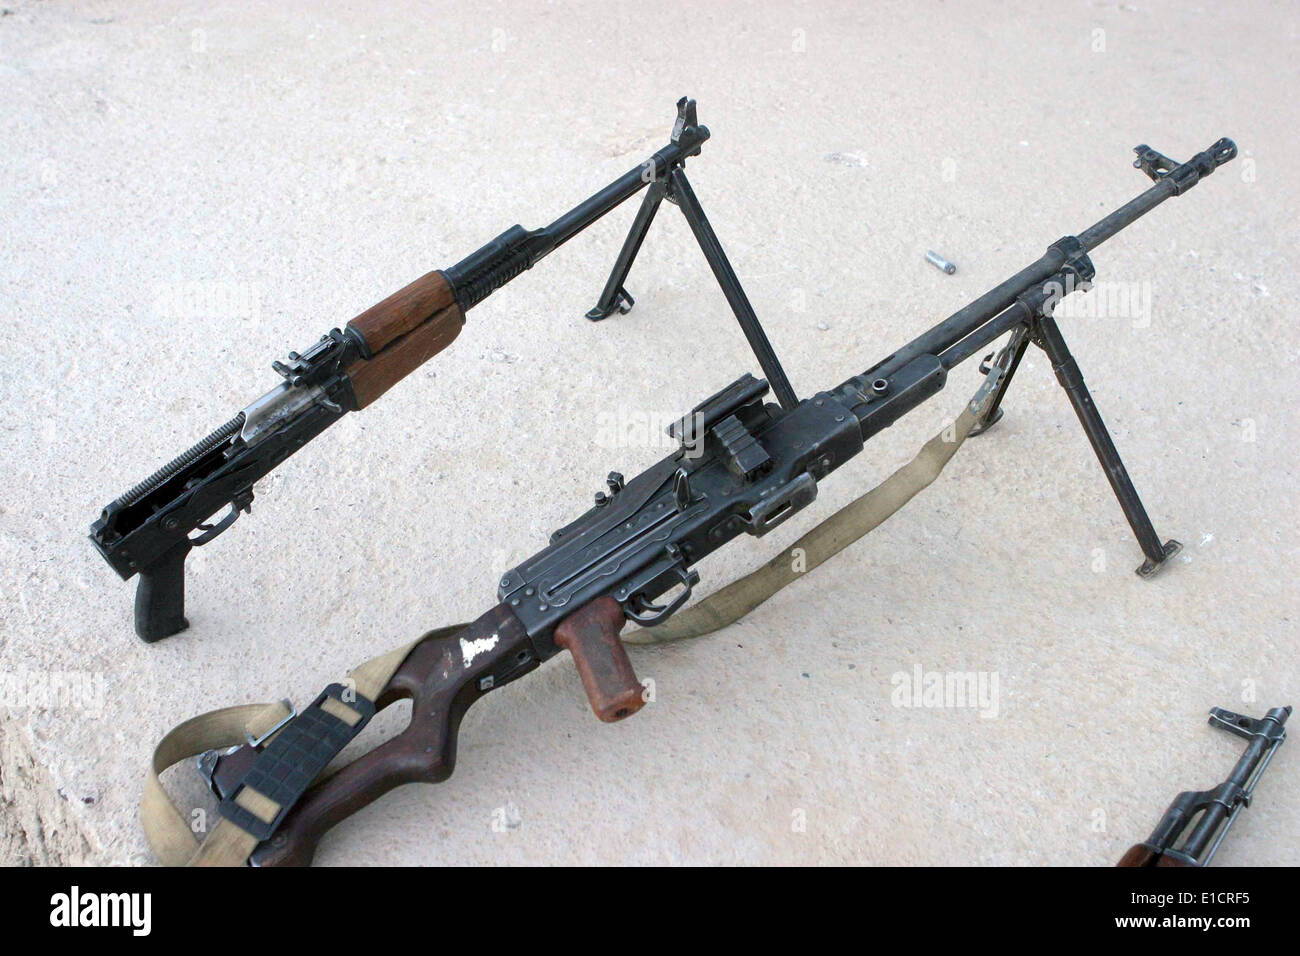 Weapons captured by US Marine Corps (USMC) Marines from insurgents that attacked the police station in Al Kharma, Iraq, during Stock Photo